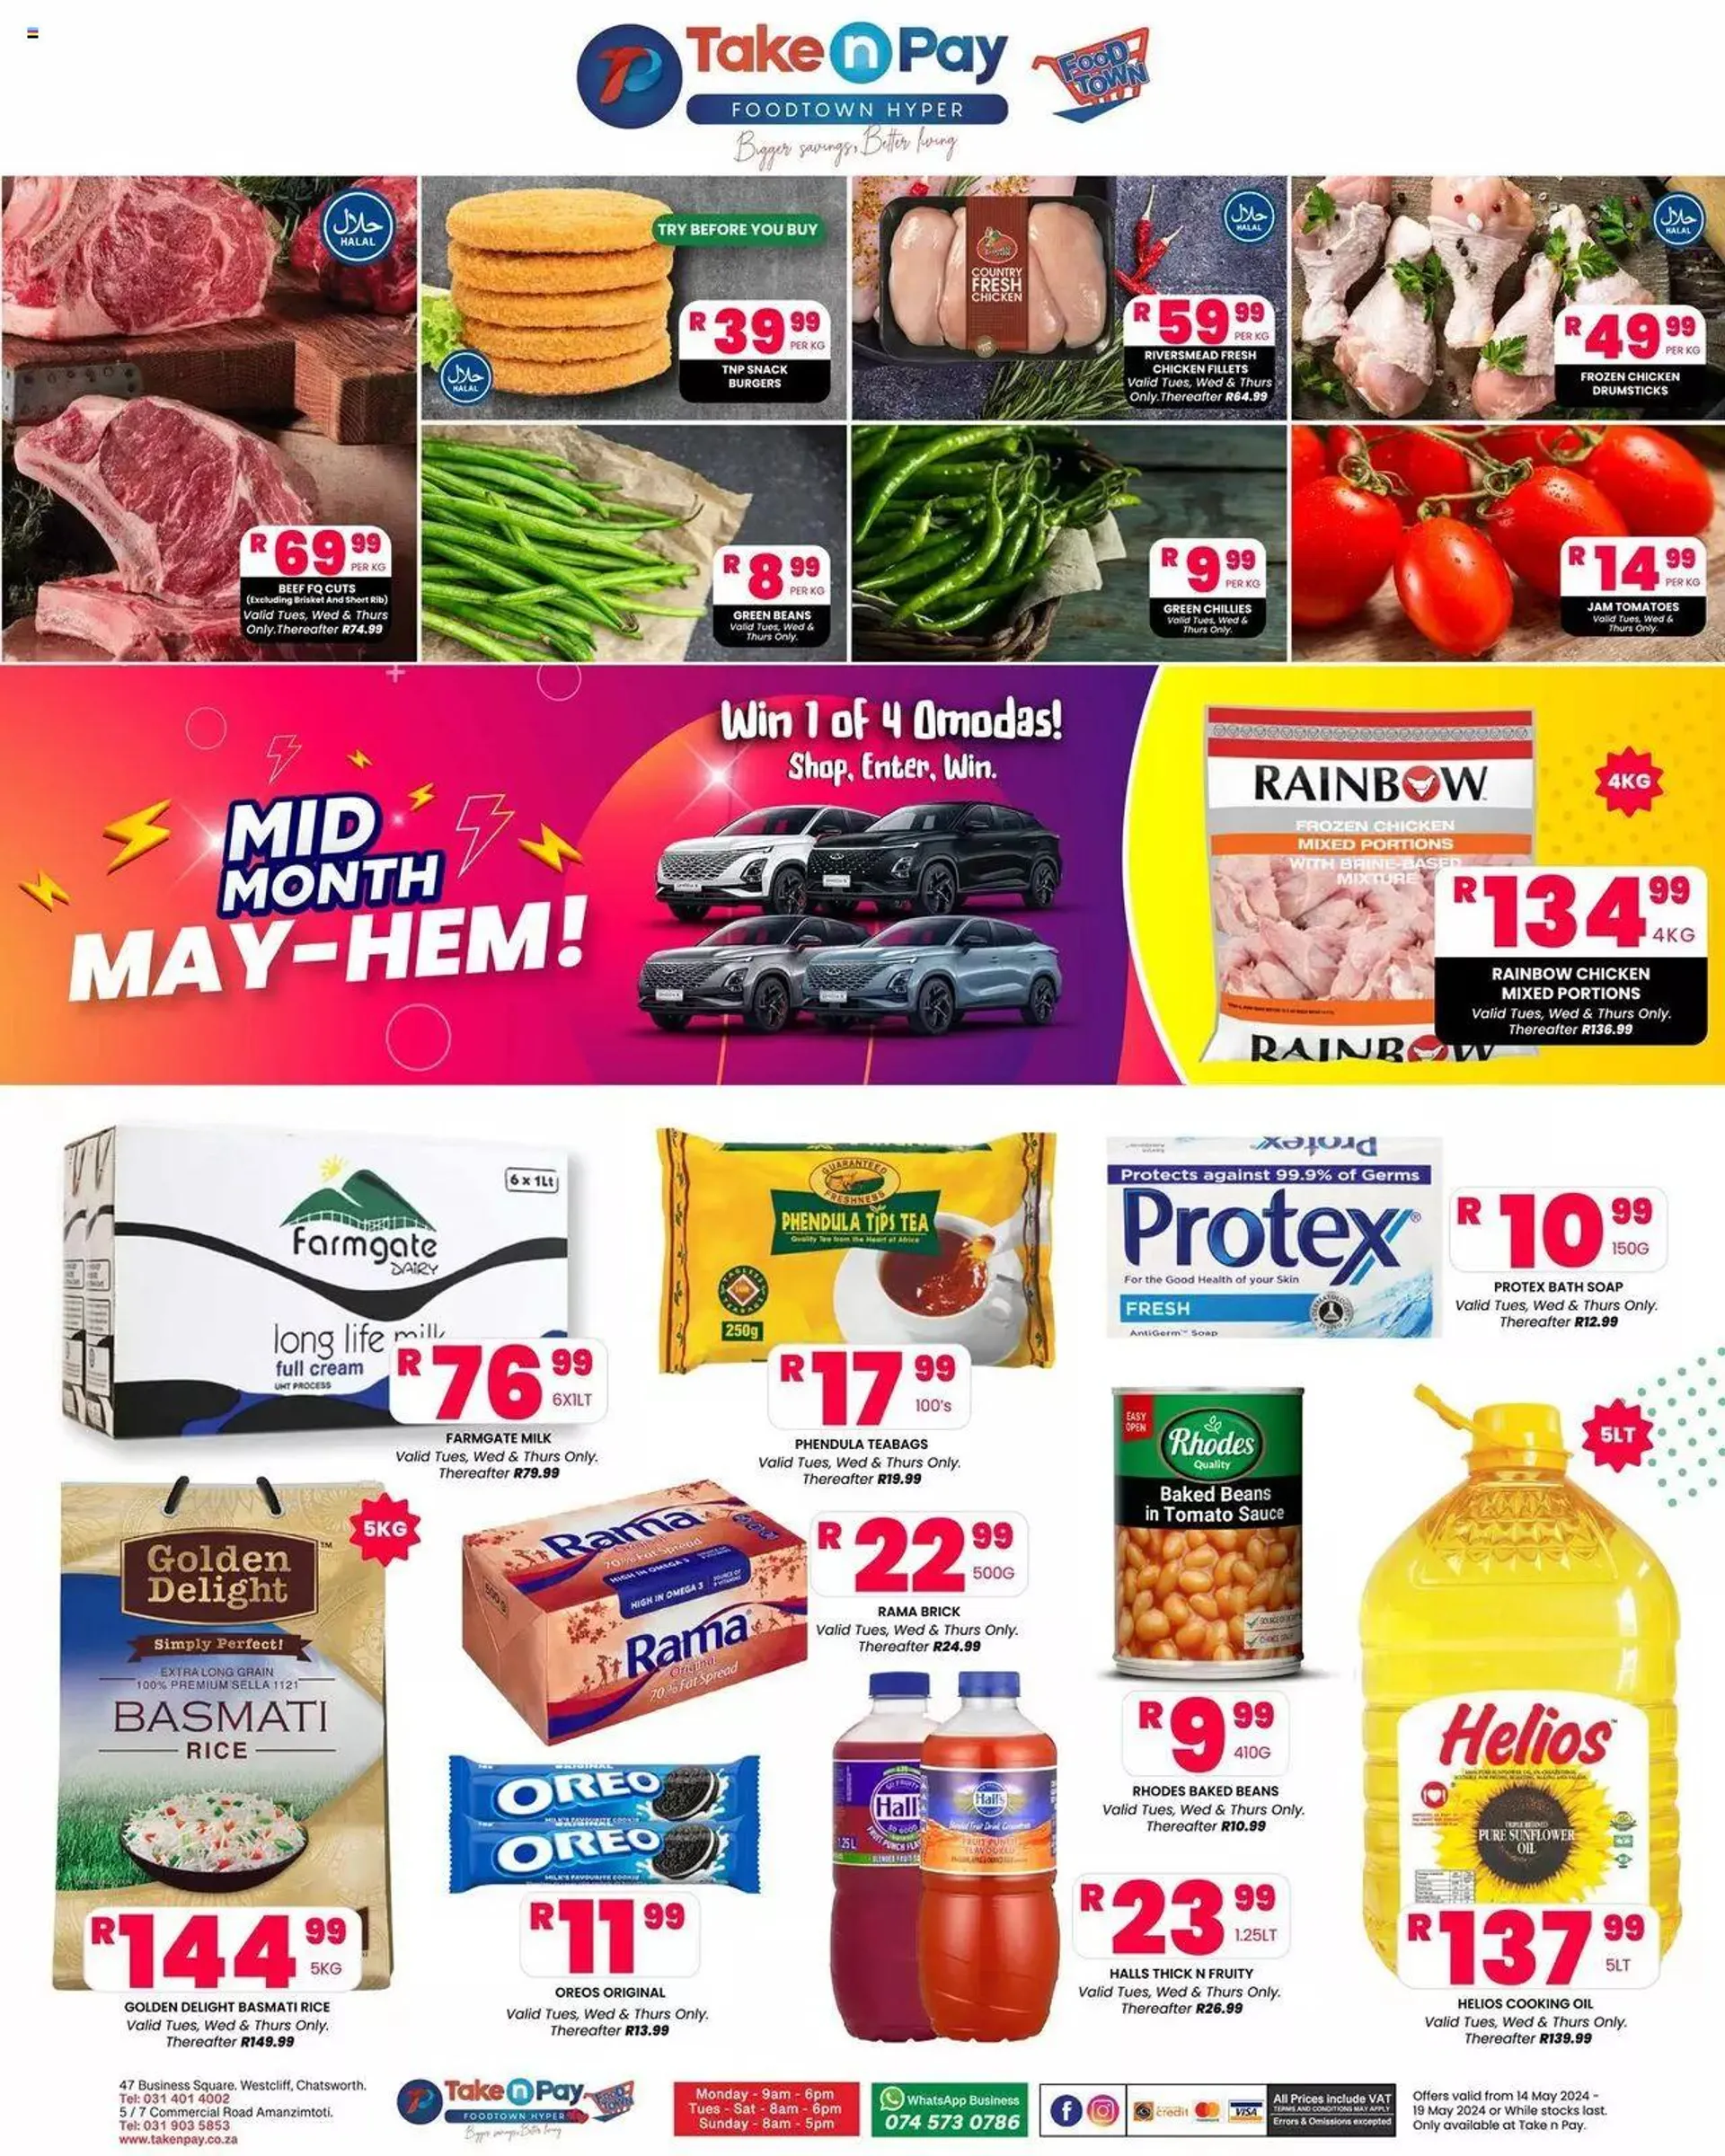 Take n Pay Specials - 0